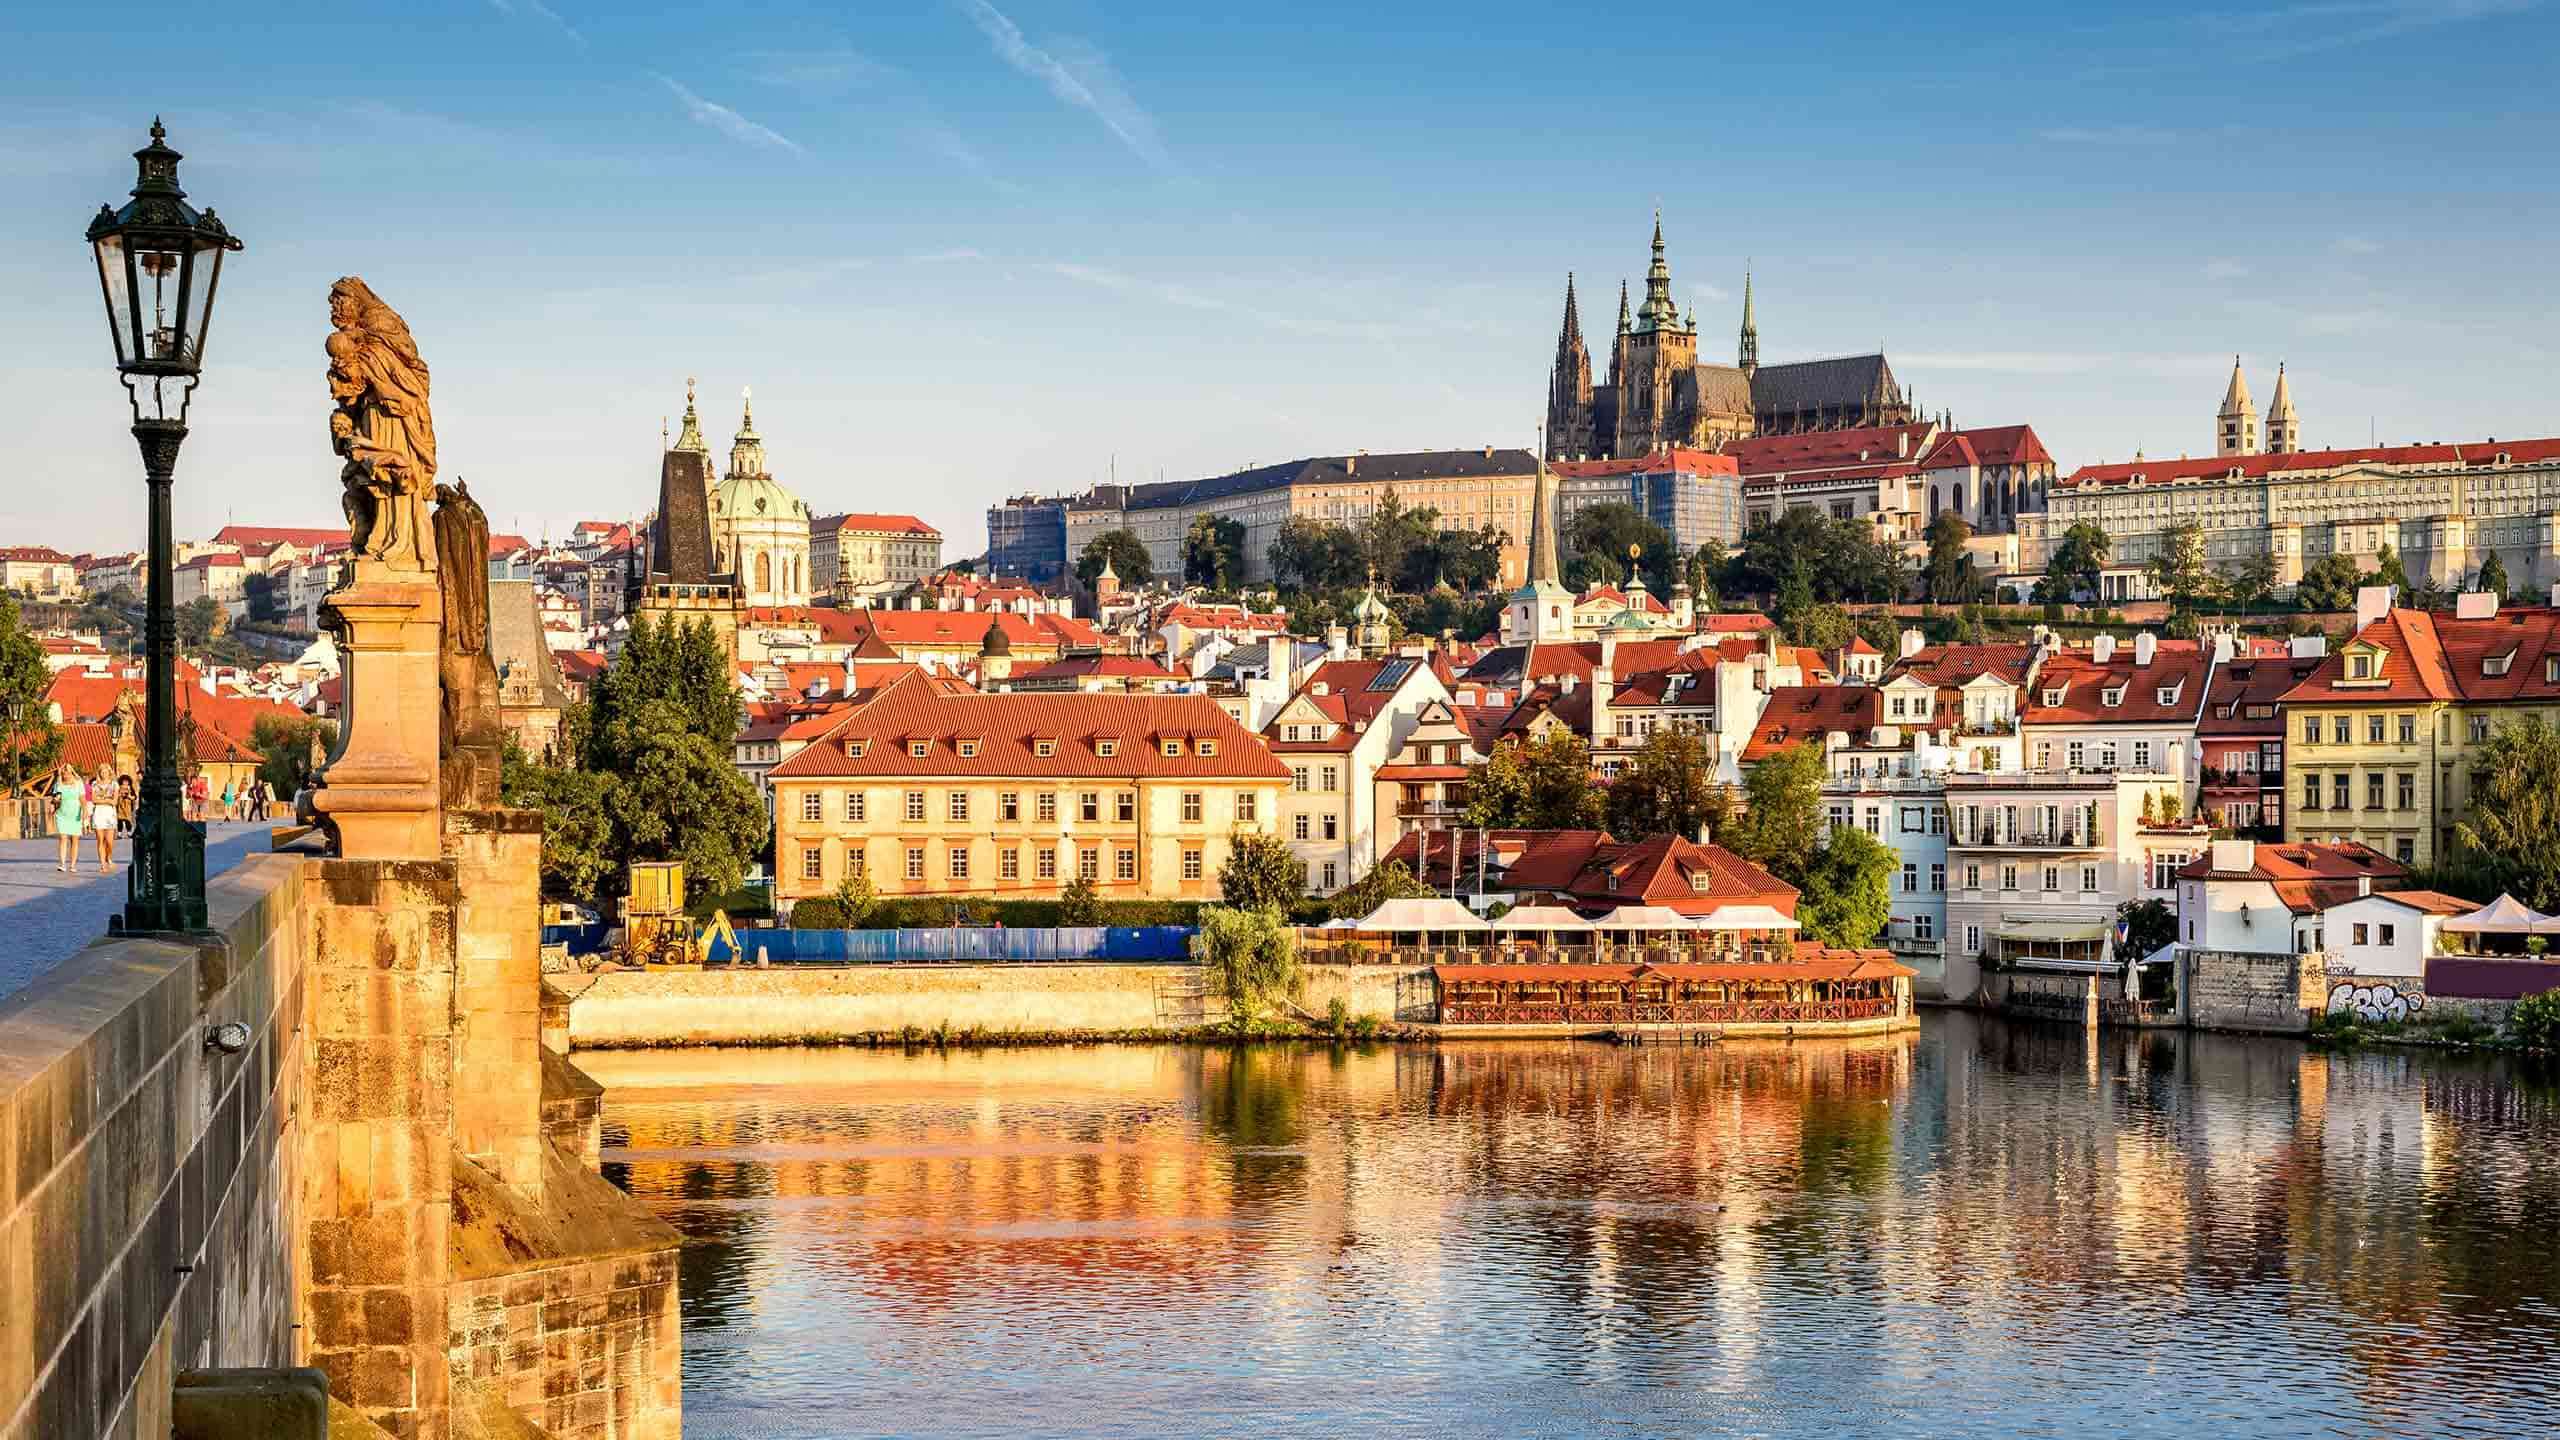 Christmastime River Cruise On The Danube With Prague (Vienna To Prague) 9D8N